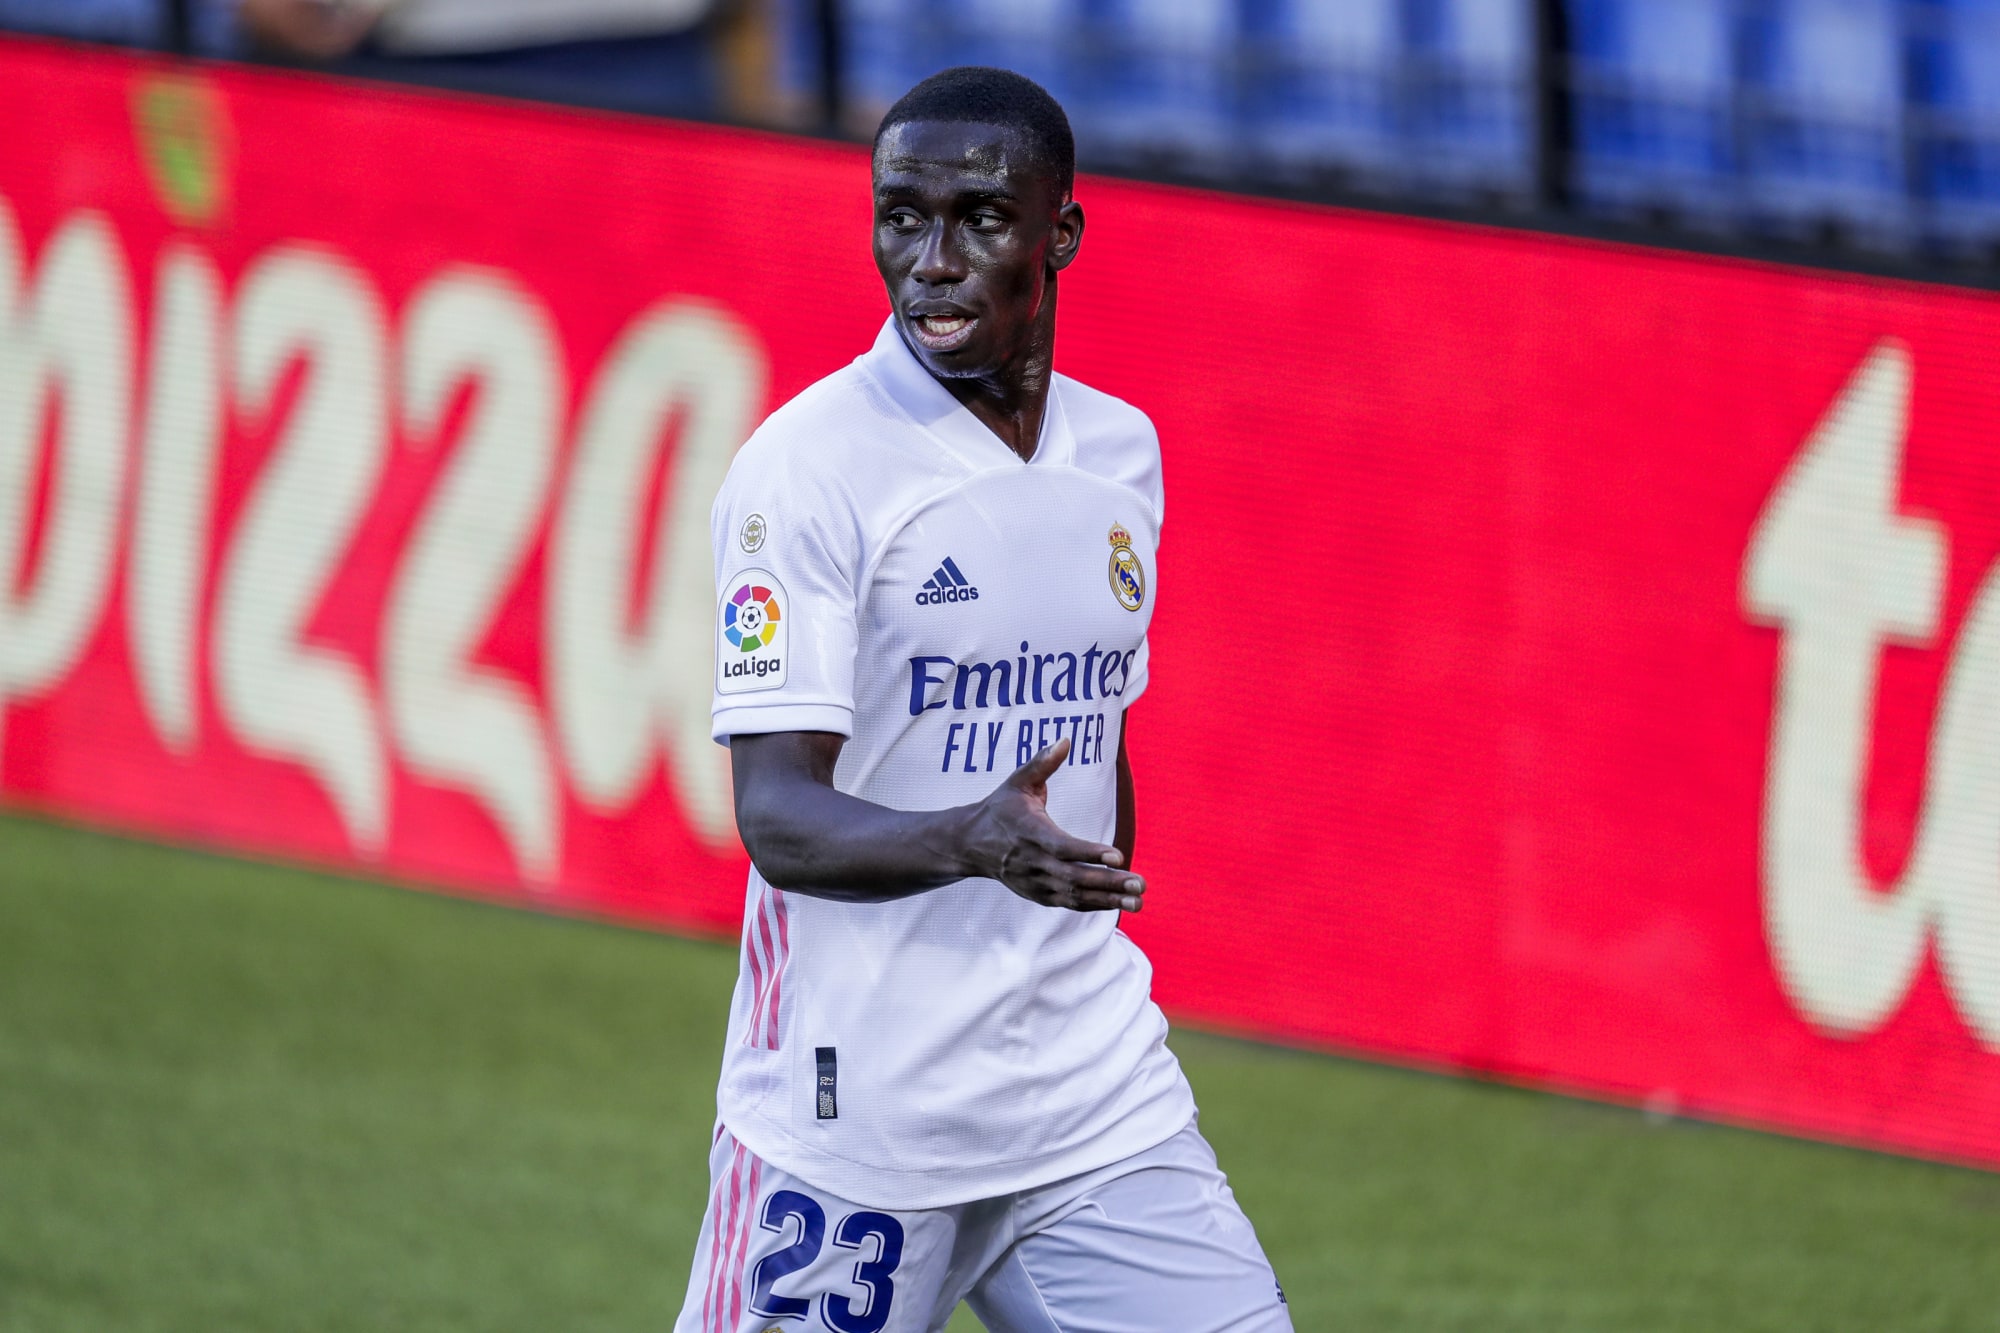  Ferland Mendy, wearing a white Real Madrid jersey with the number 23, is playing in a soccer match.